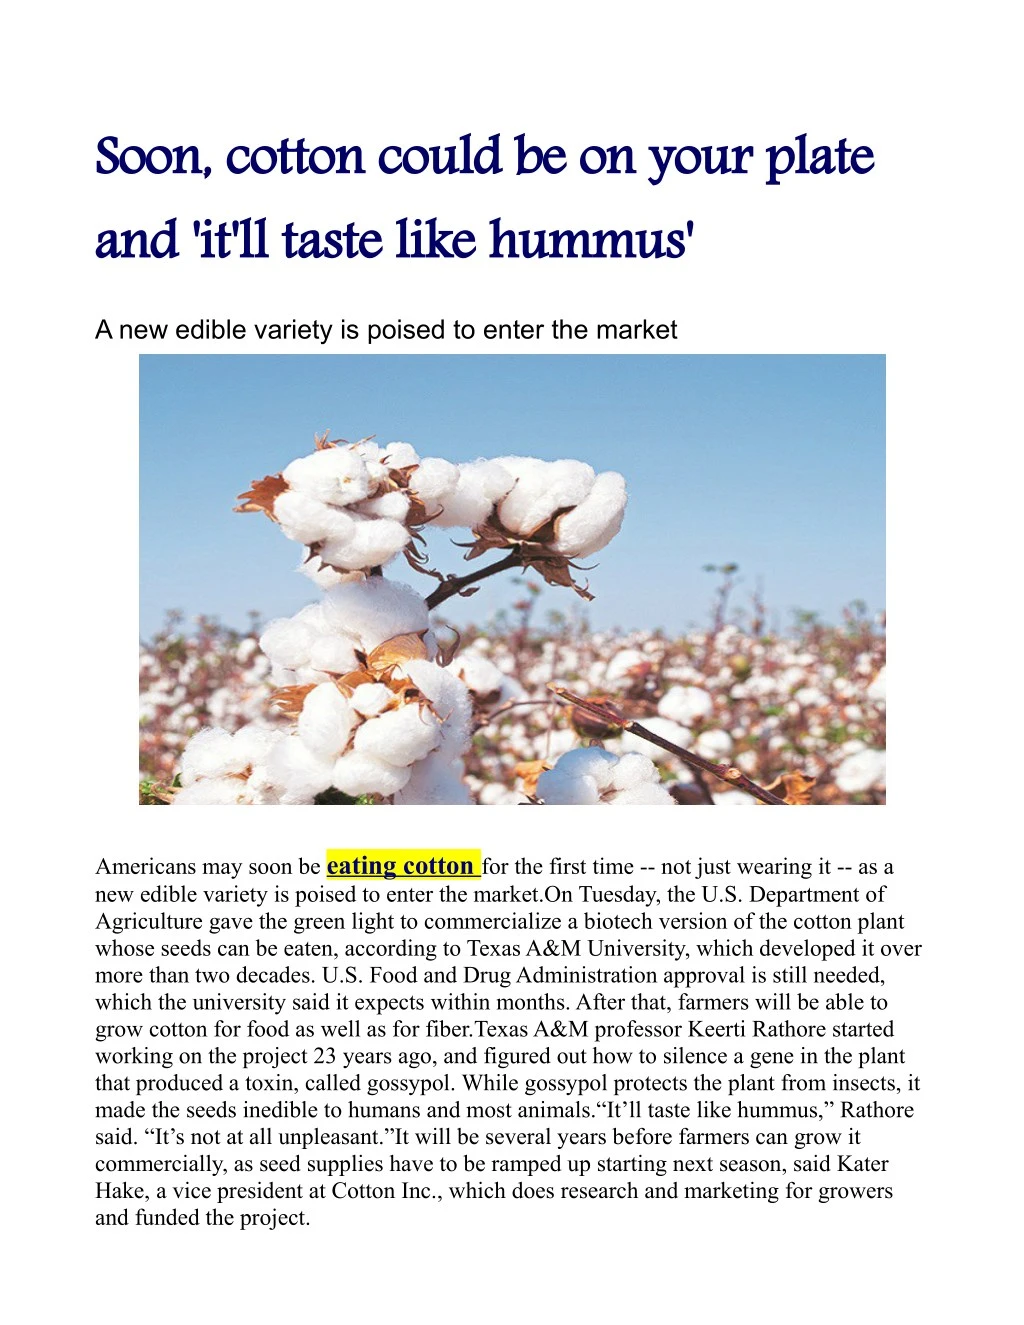 soon cotton could be on your plate